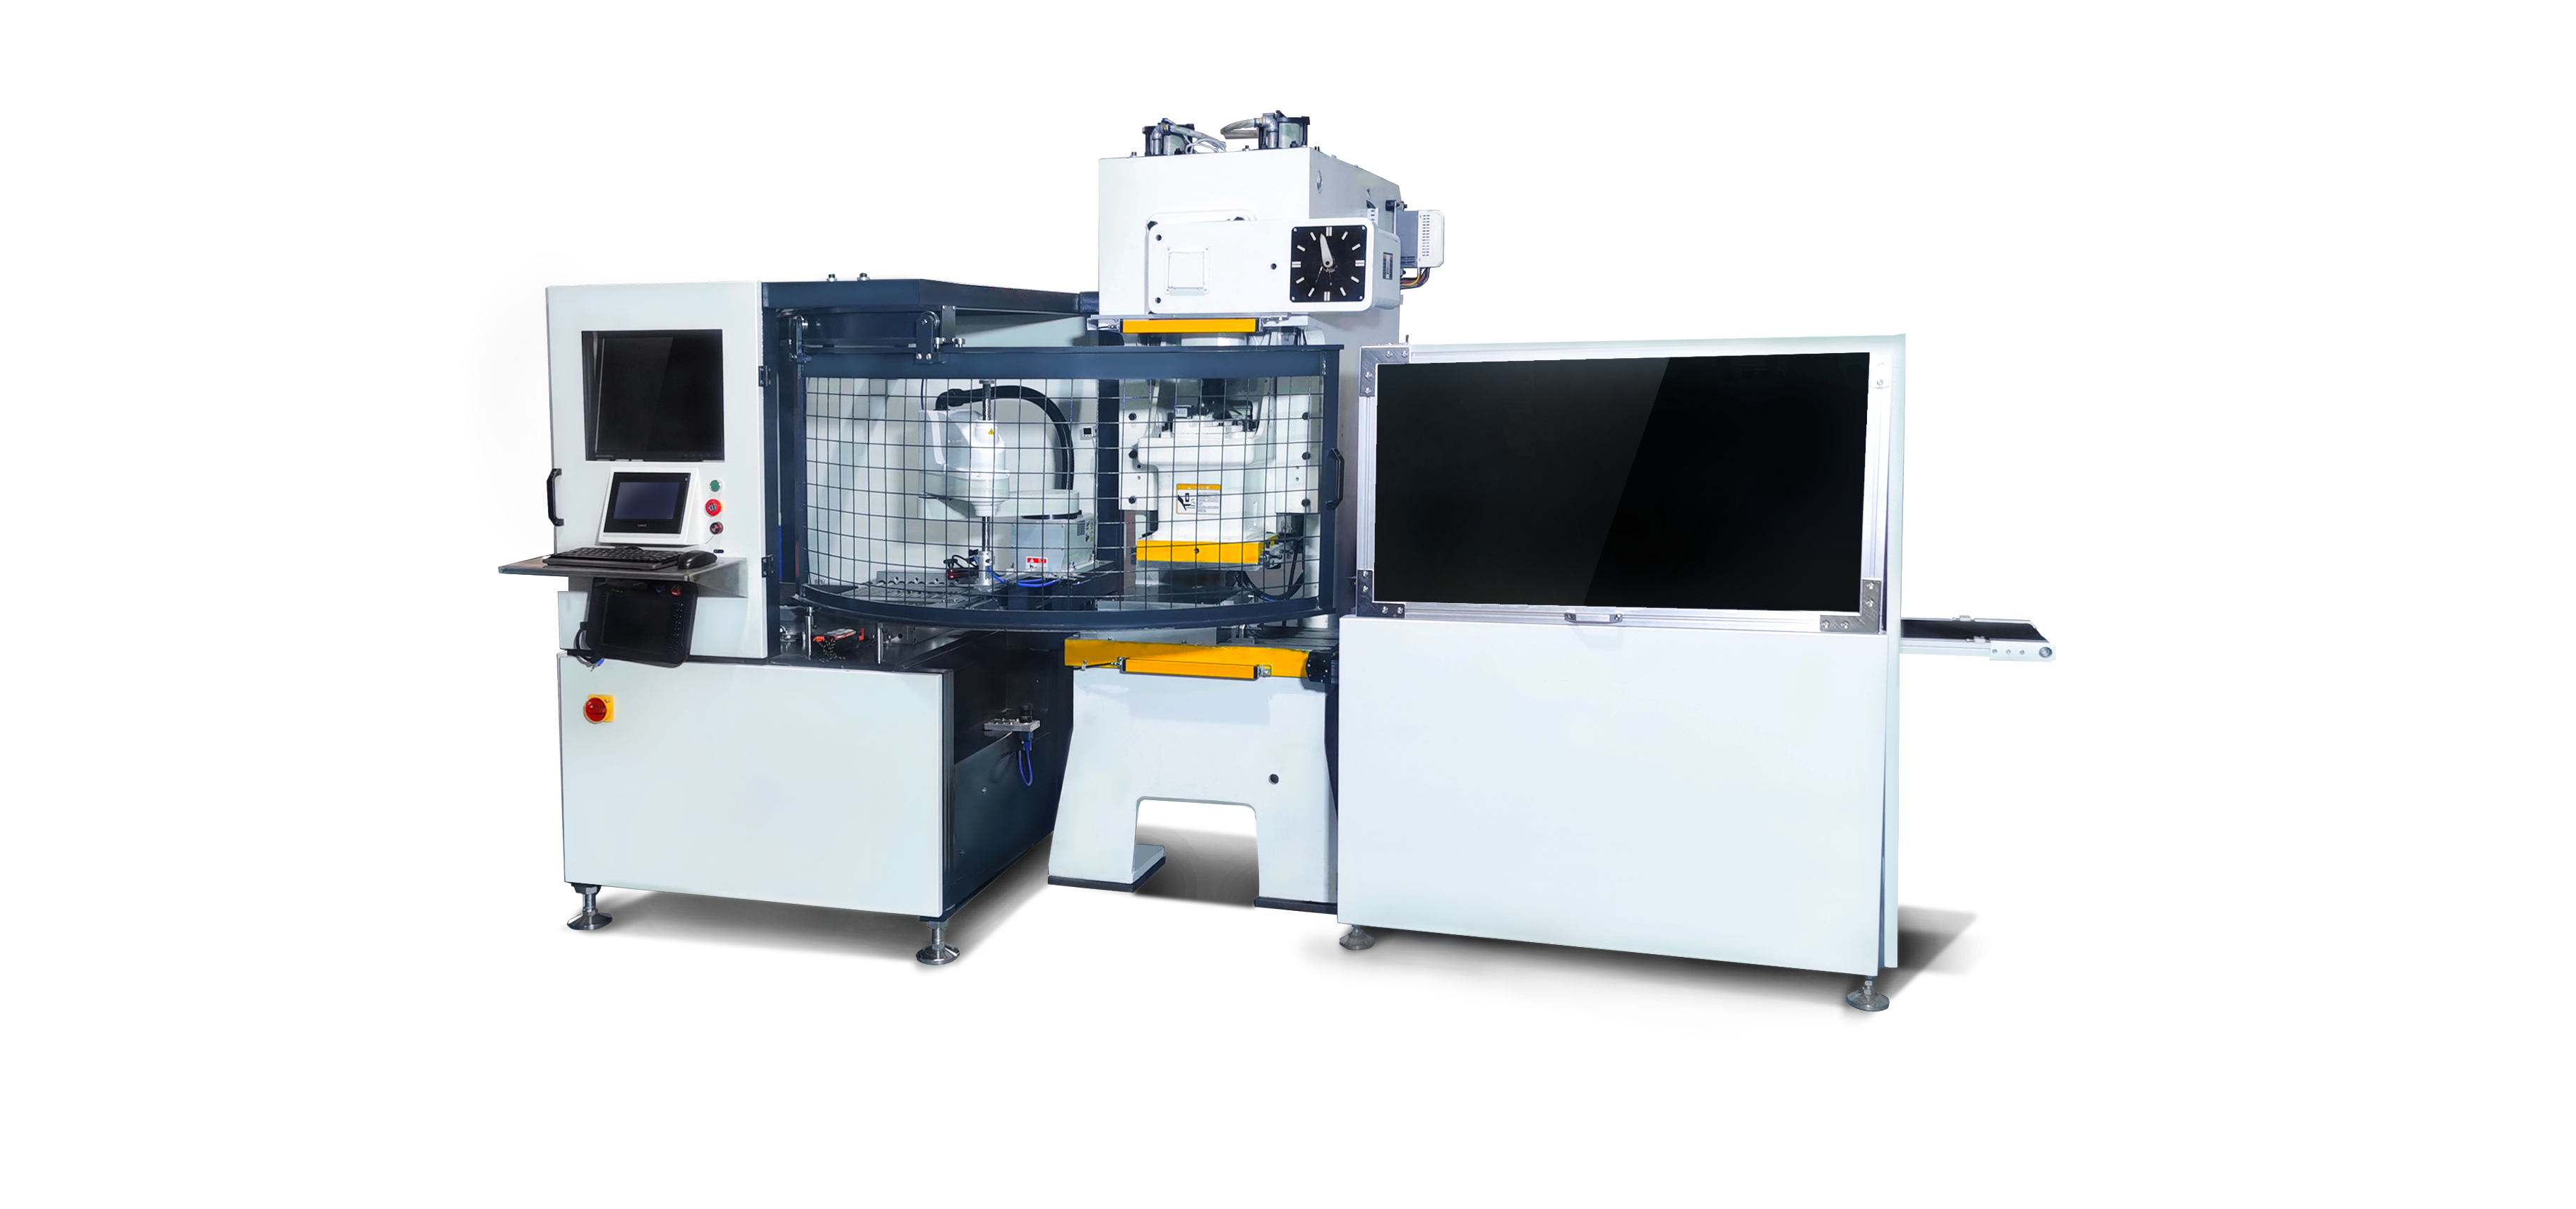 CS-CQ240 automatic vision type die cutting and waste free machine